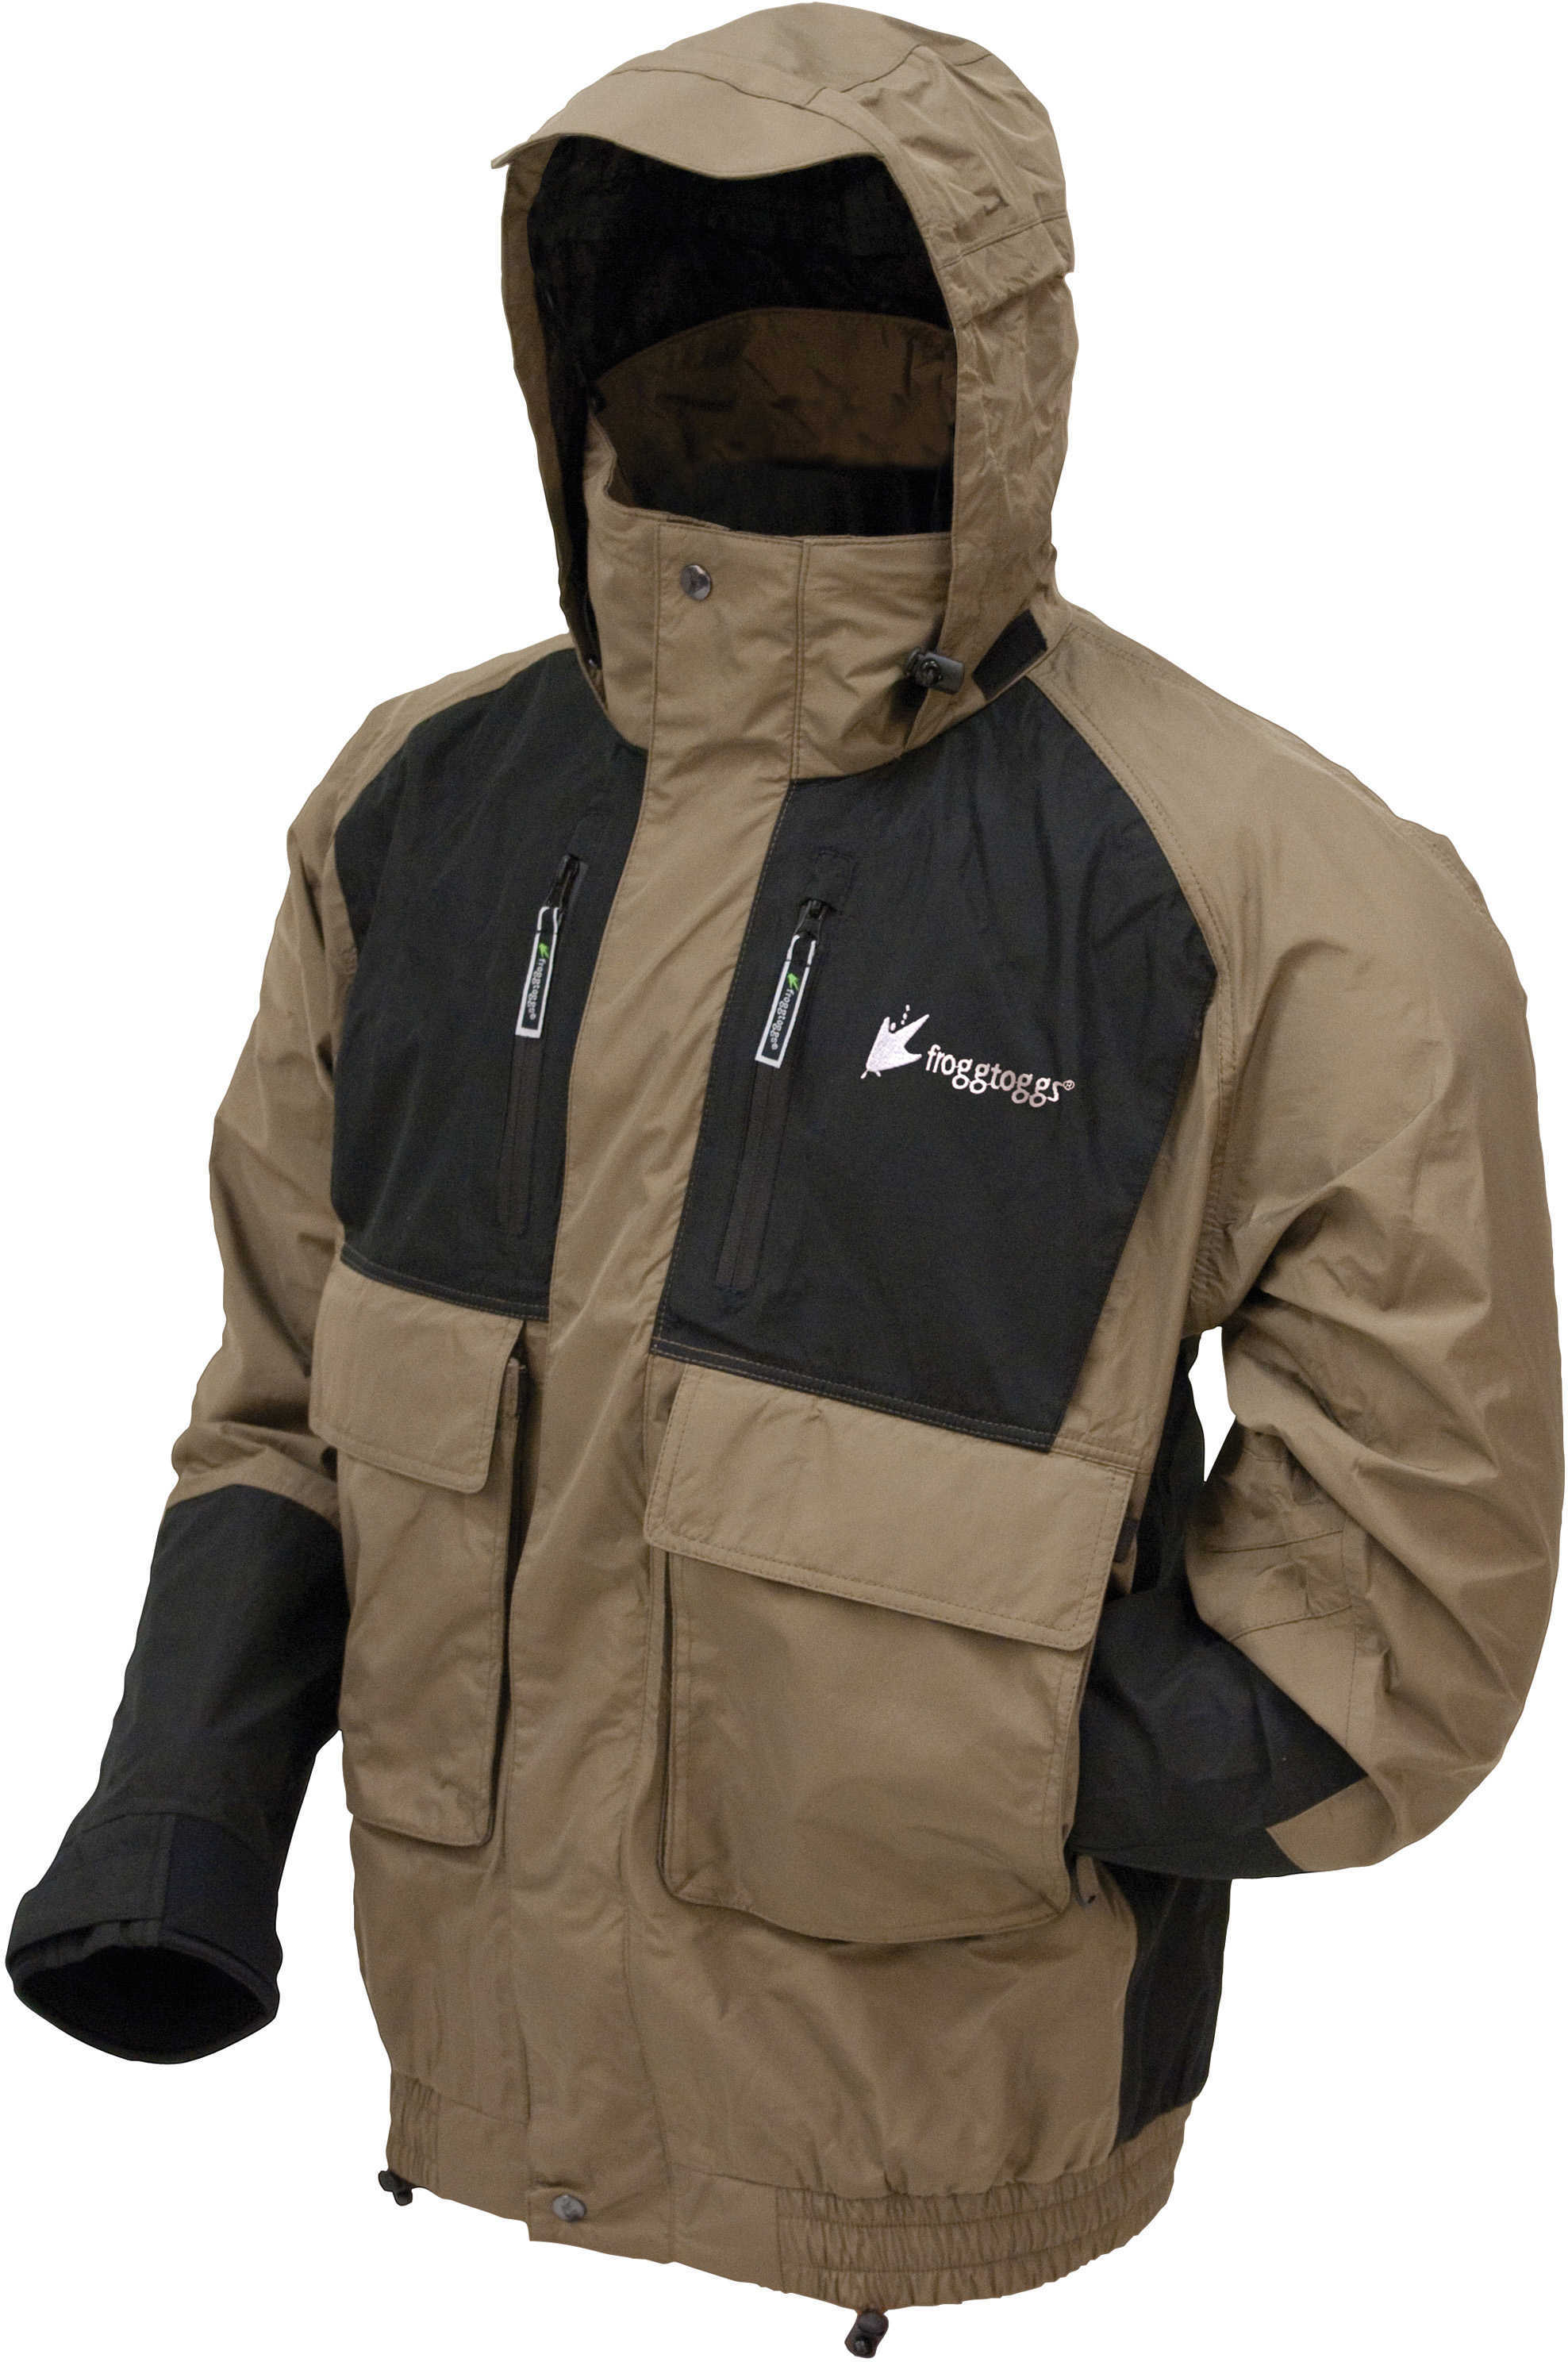 Frogg Toggs Firebelly Toadz Jacket Black/Stone Large NT6201-105LG